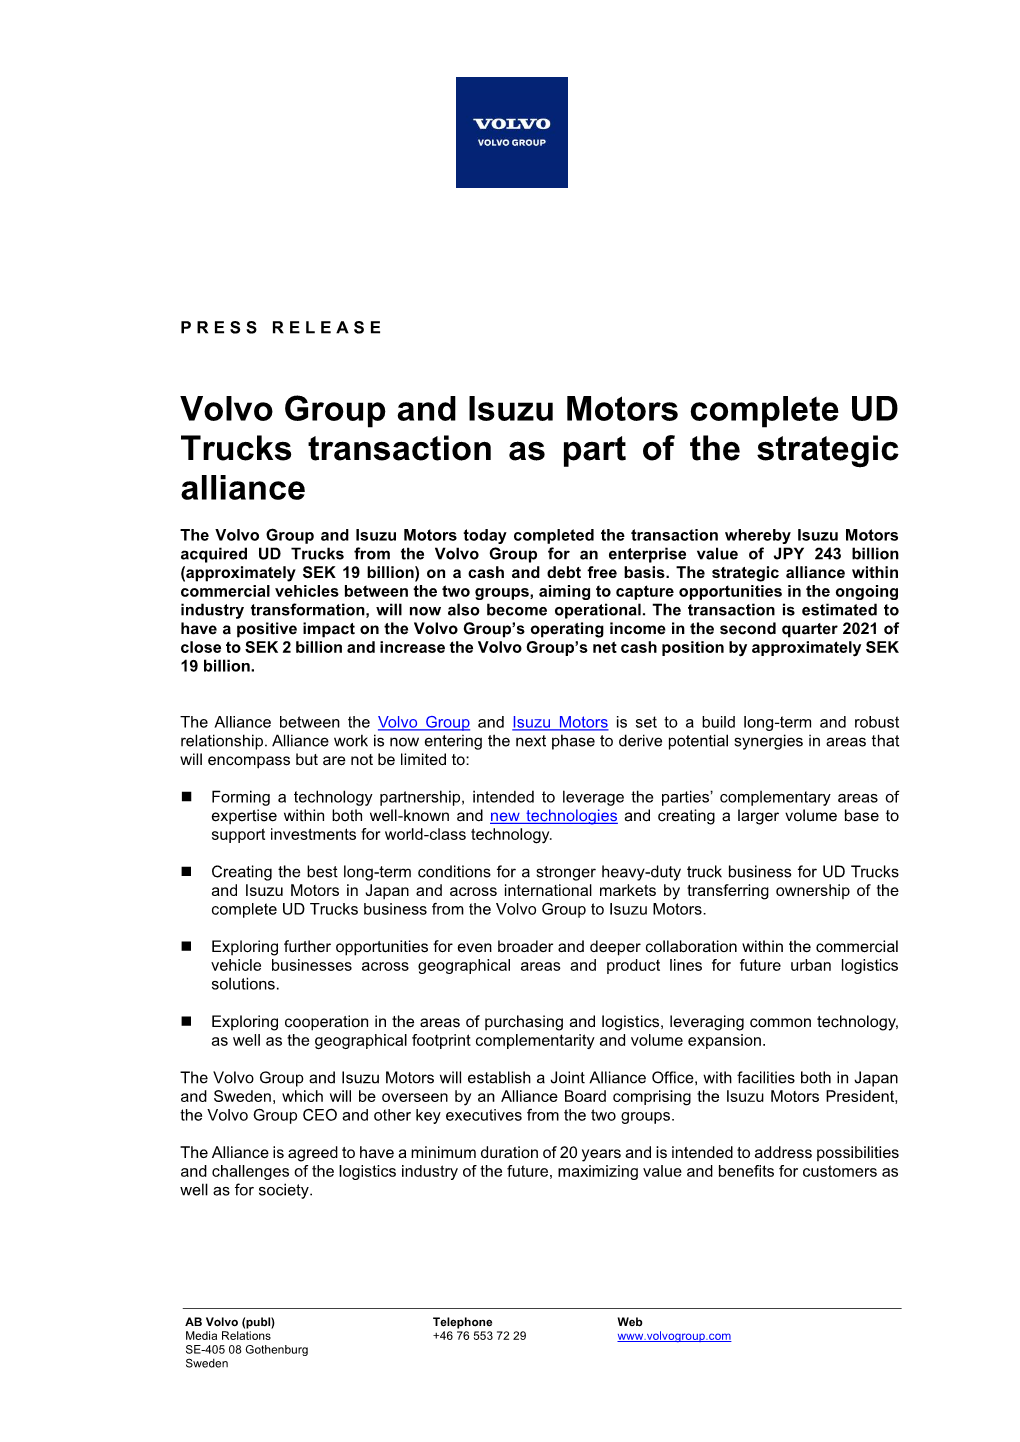 Volvo Group and Isuzu Motors Complete UD Trucks Transaction As Part of the Strategic Alliance